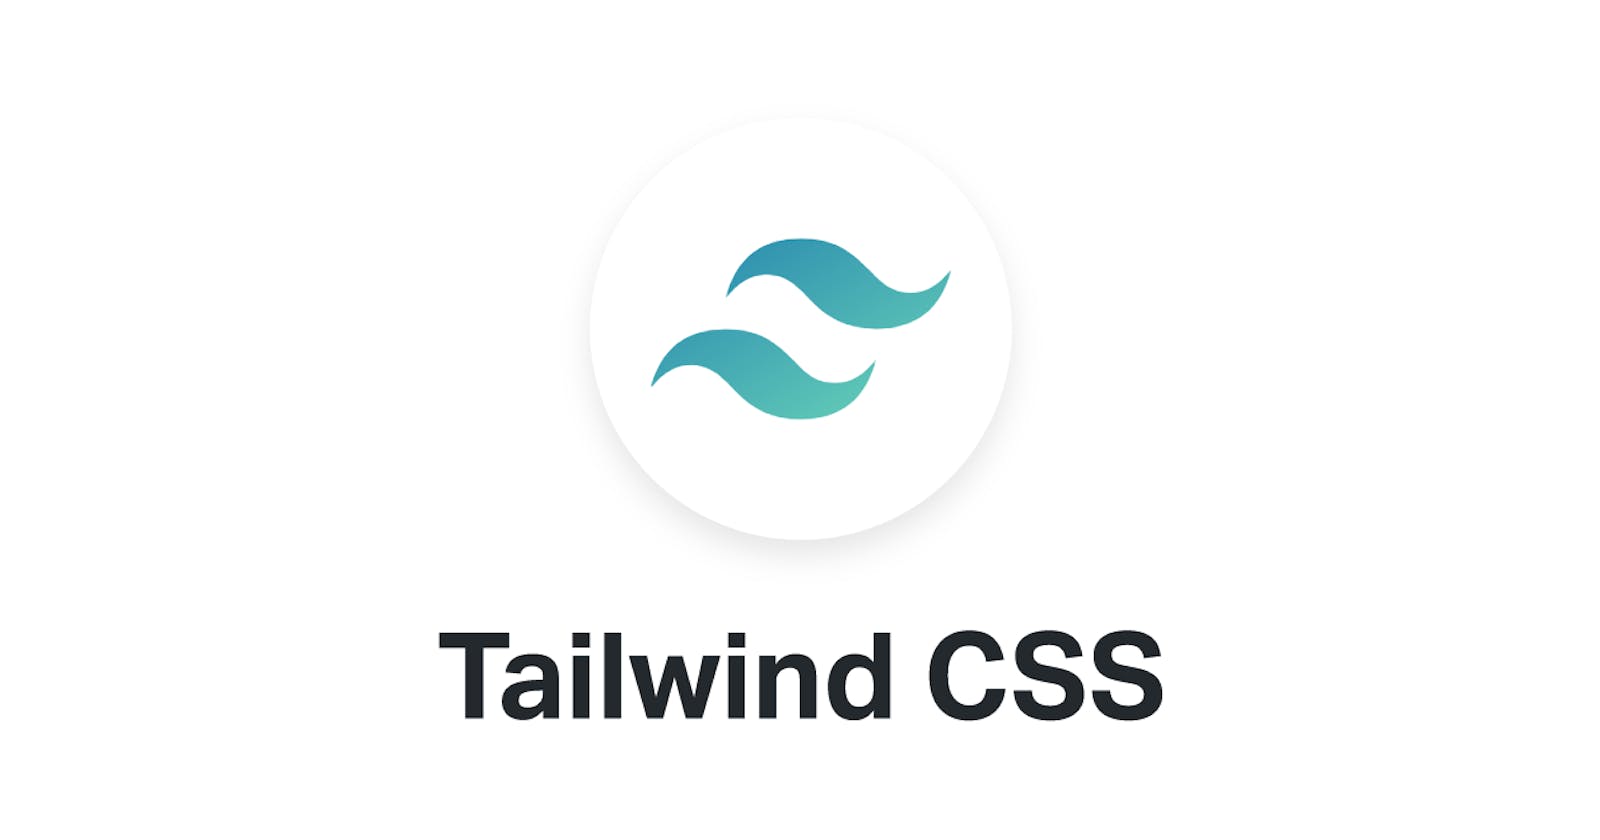 Why you absolutely need to try TailwindCSS